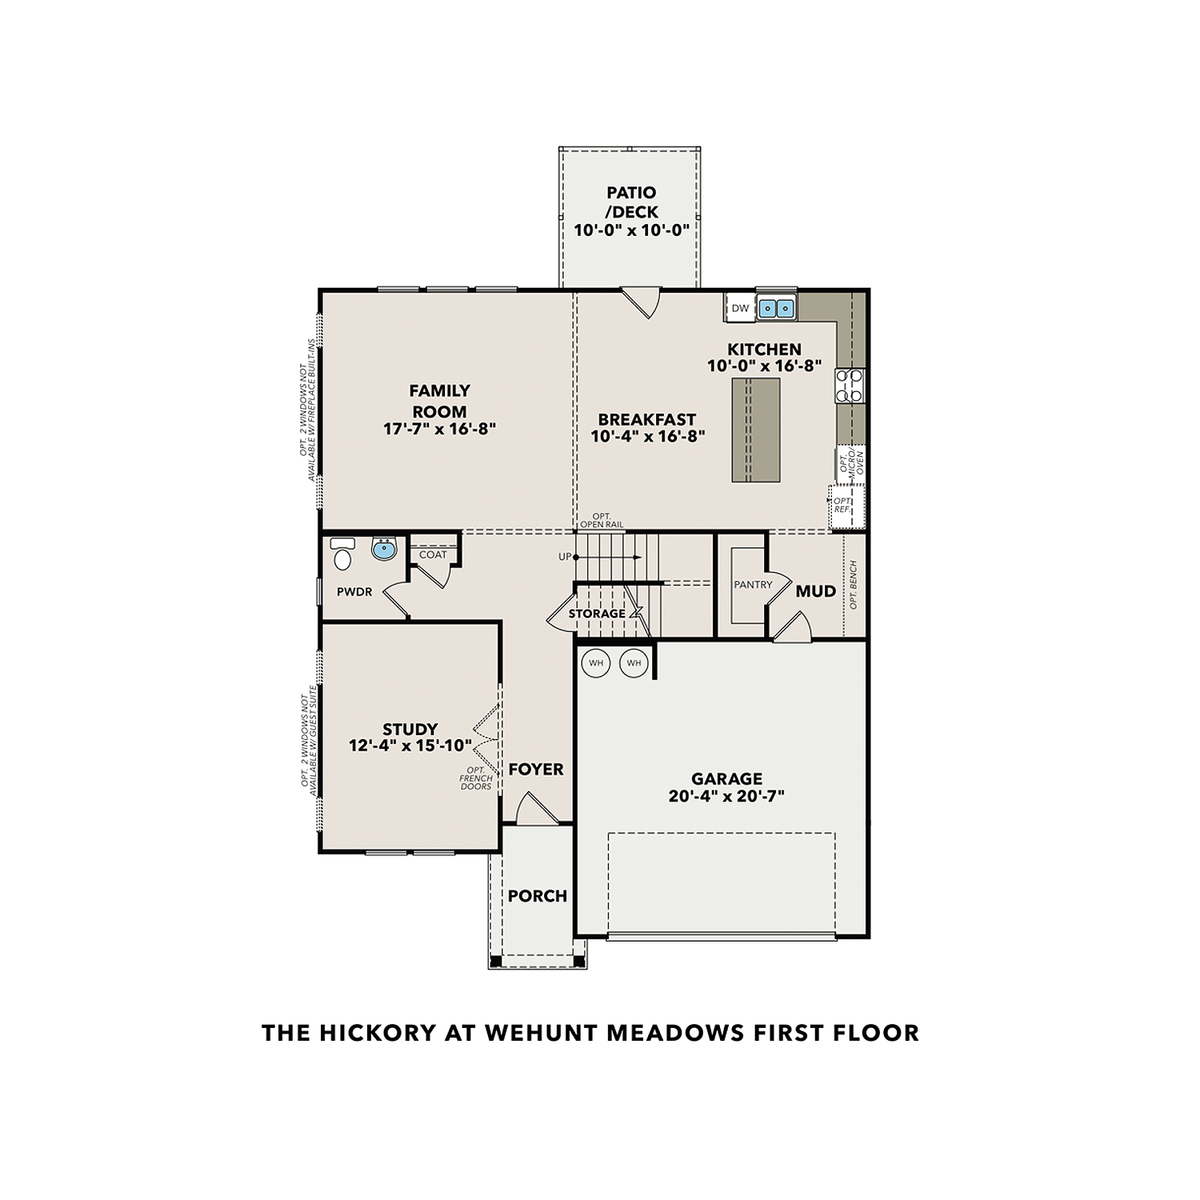 1 - The Hickory A at Wehunt Meadows buildable floor plan layout in Davidson Homes' Wehunt Meadows community.